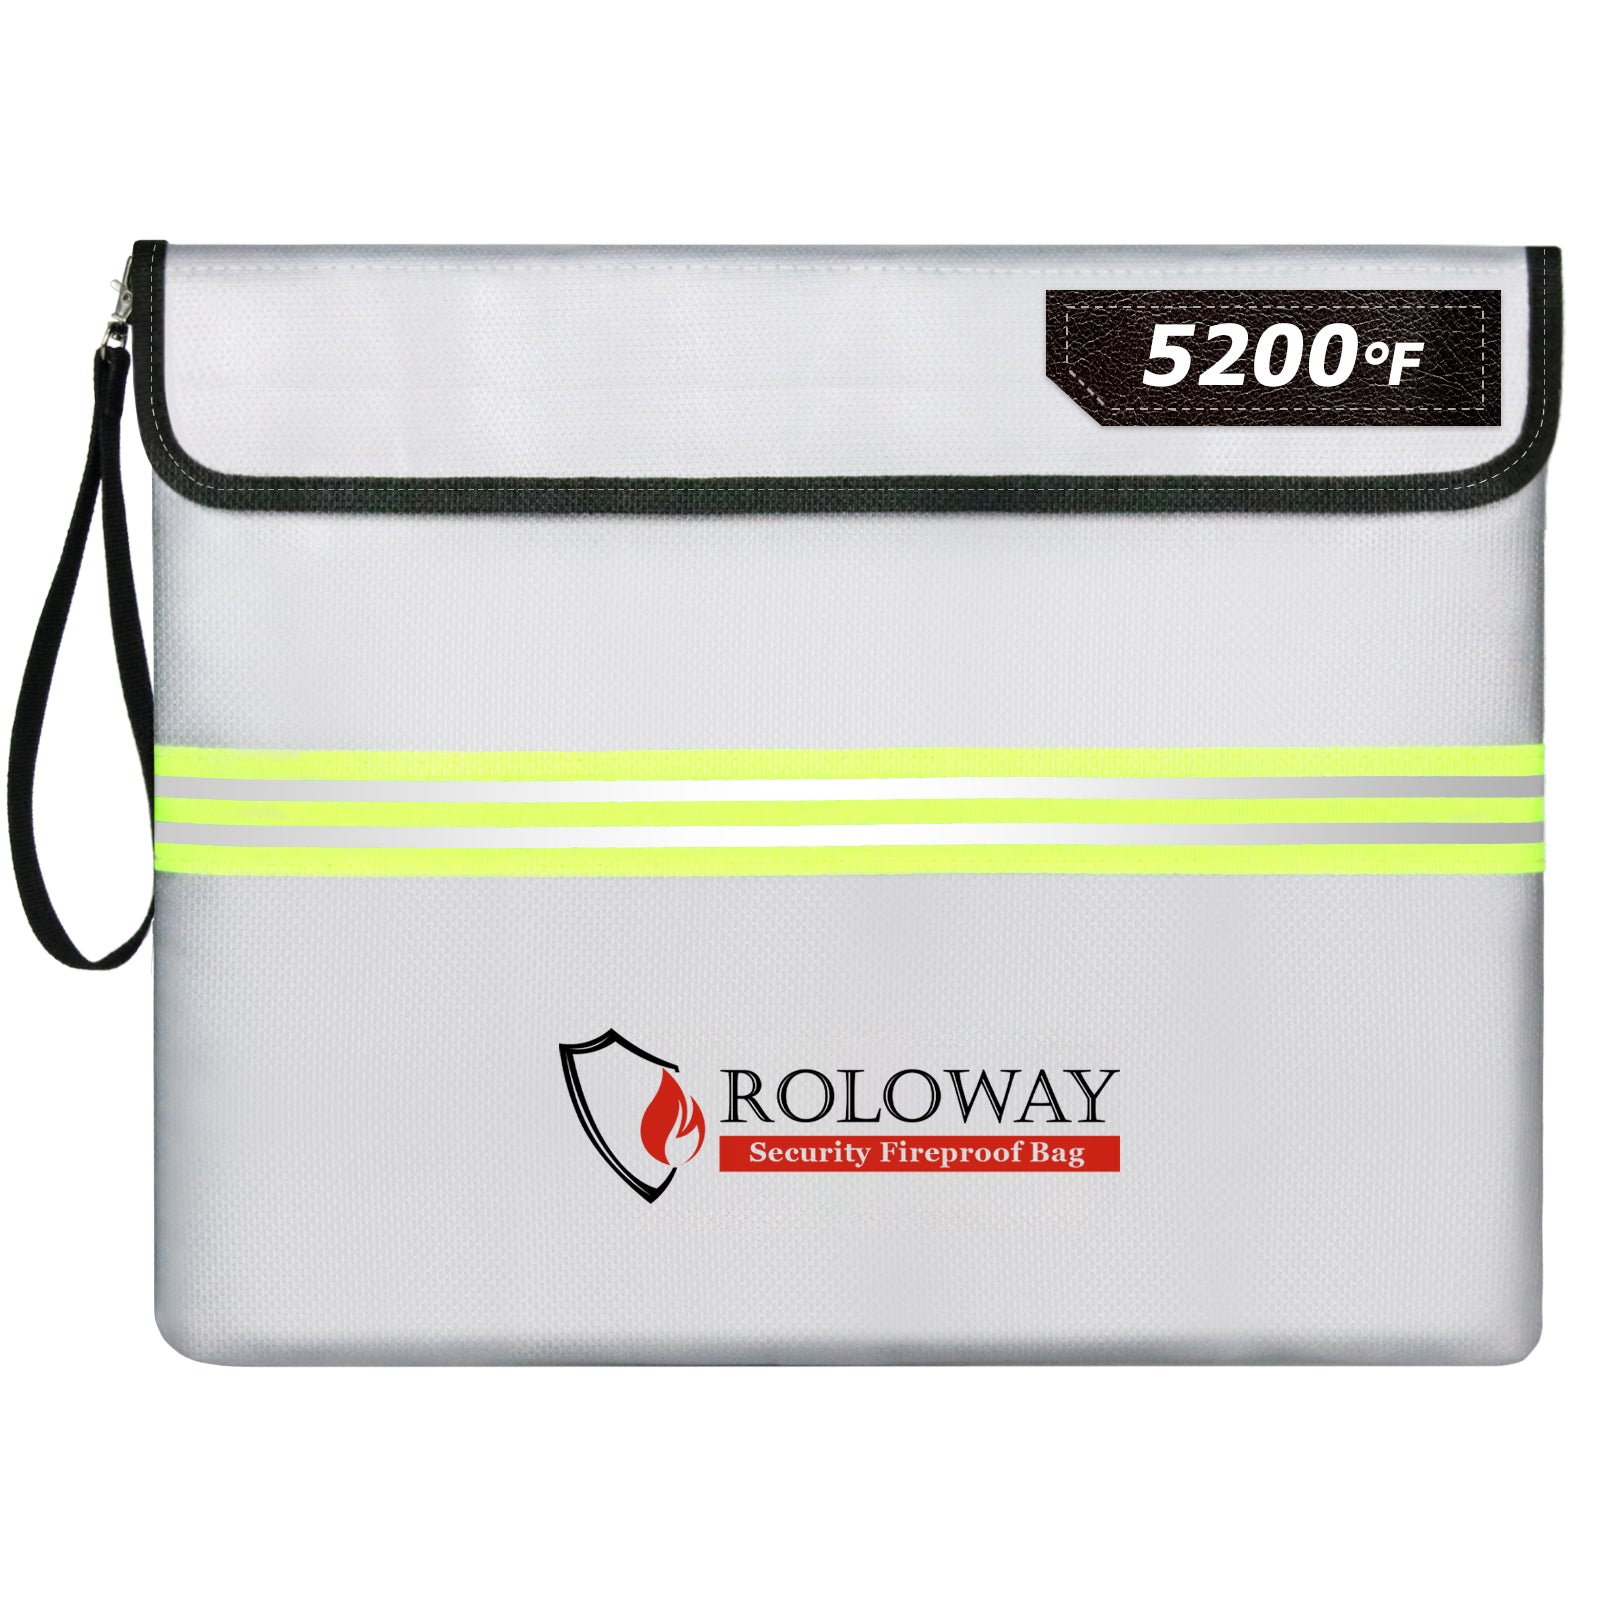 ROLOWAY Fireproof Document Bag (14 x 11 inch) with 5200°F Upgraded Aluminum Foil Layer(Sliver)